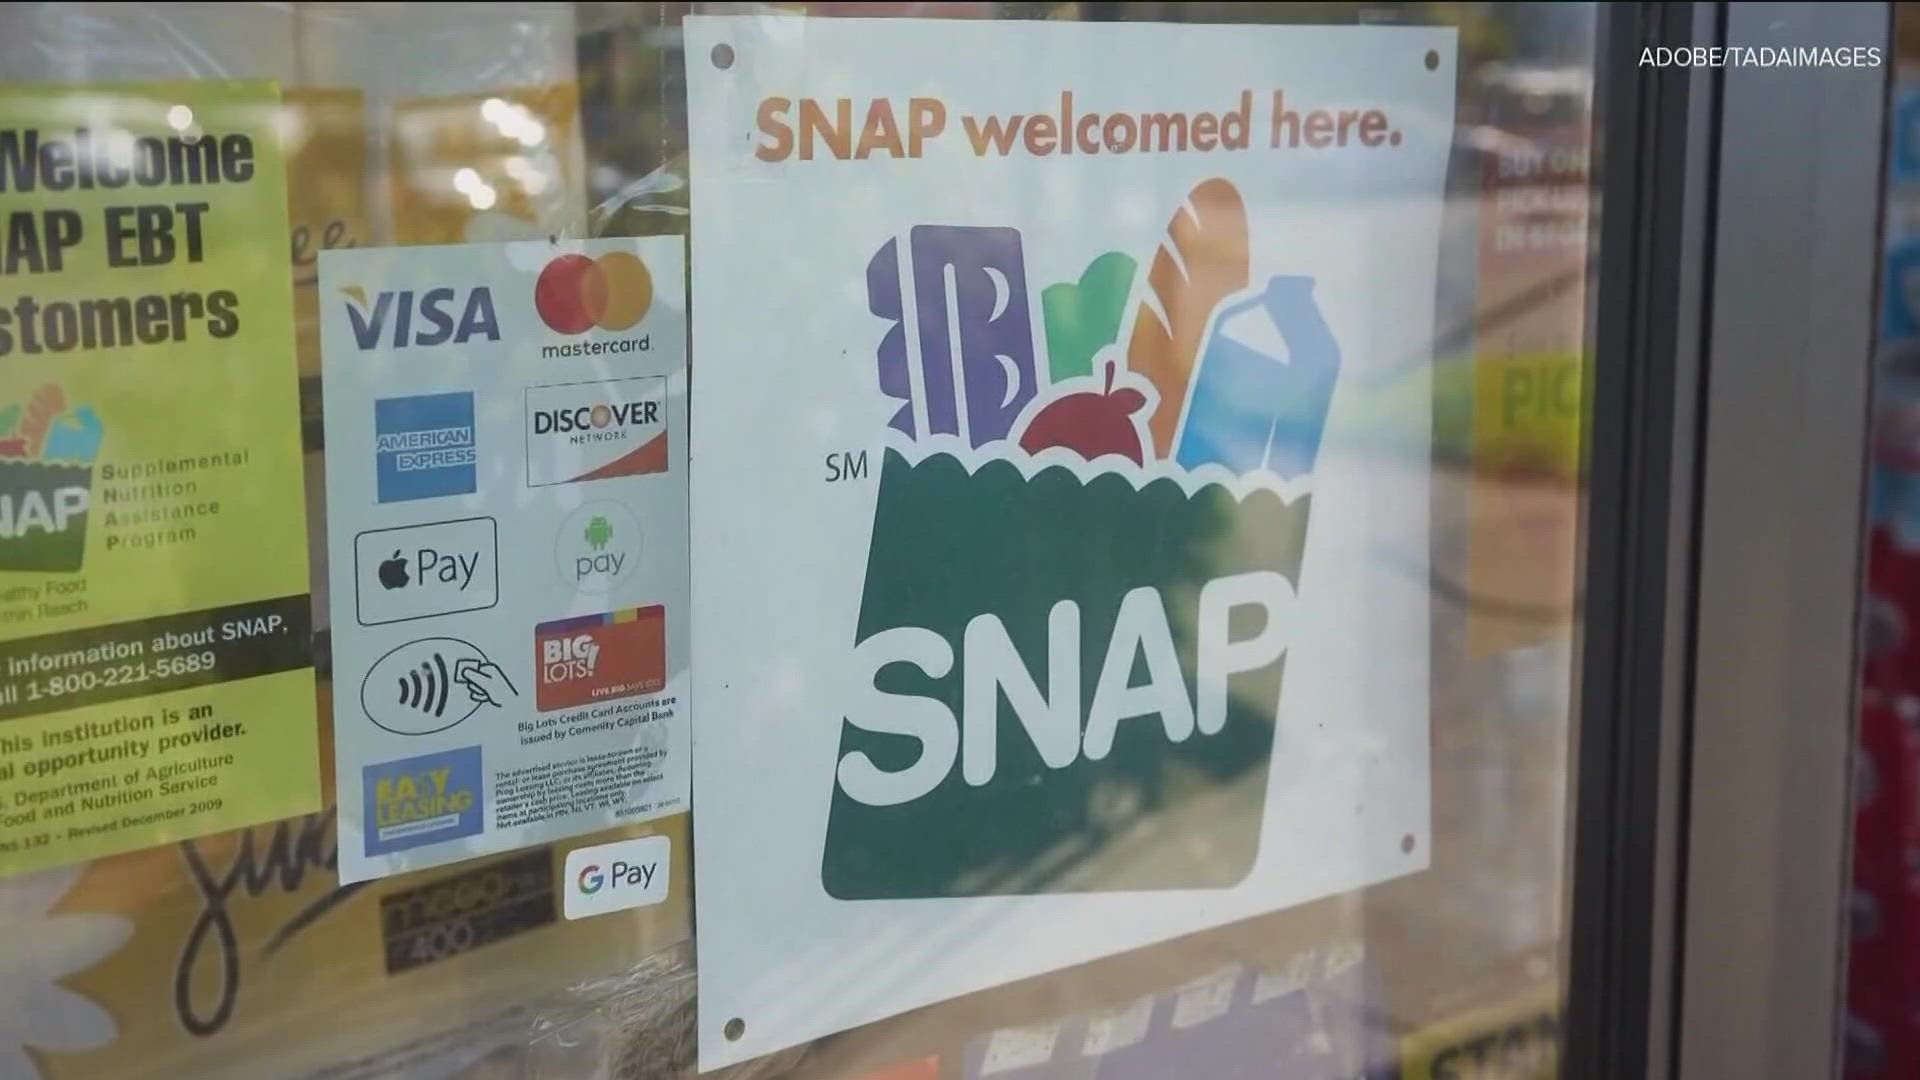 New efforts are underway to get that money back to Georgia families who rely on the SNAP program.